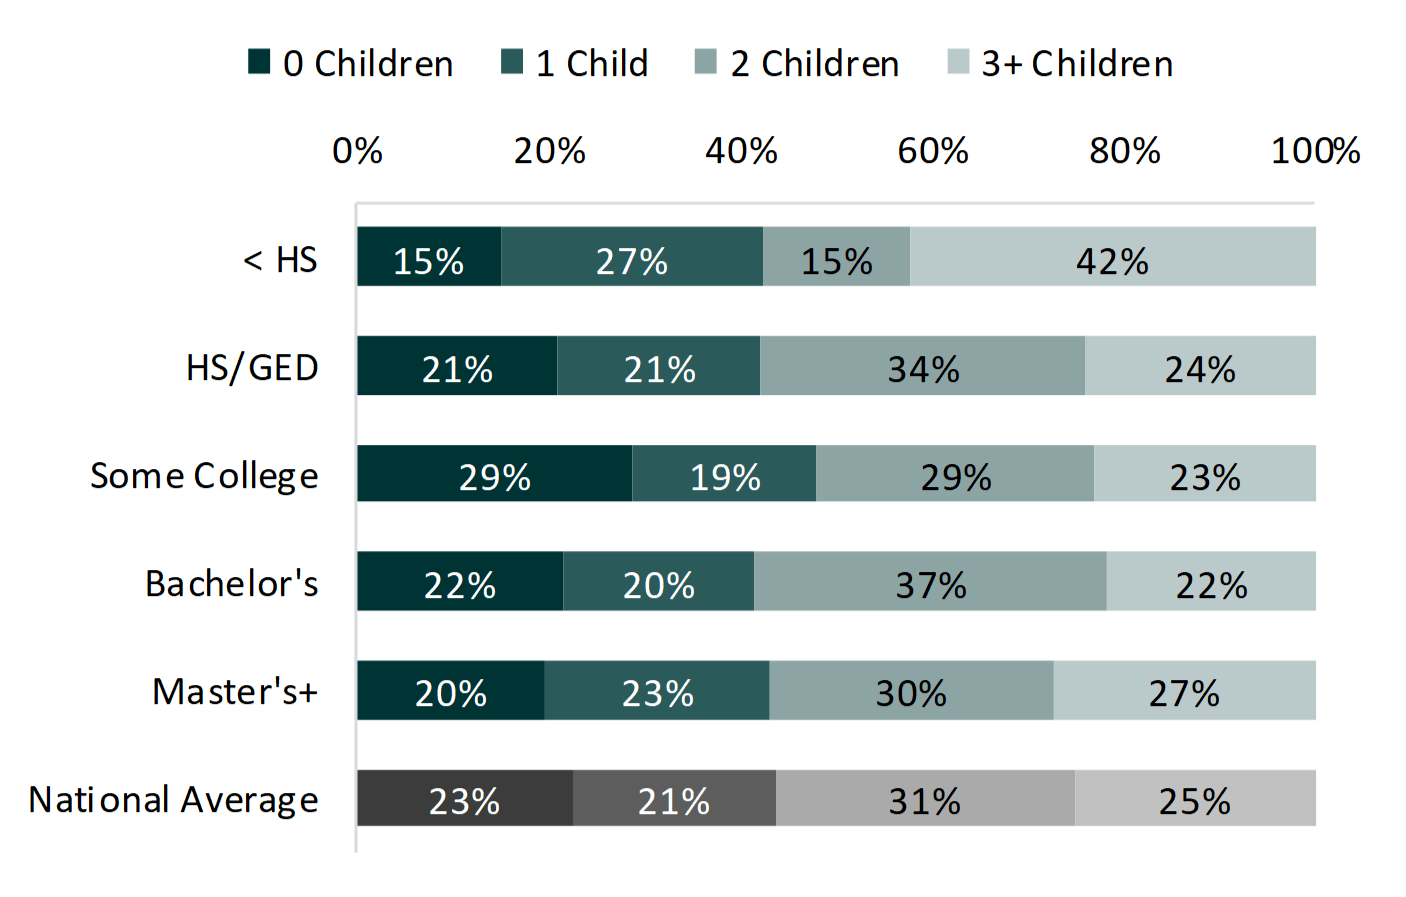 bar chart in shades of teal on Number of Children by Education Among Men Aged 40-44, 2016